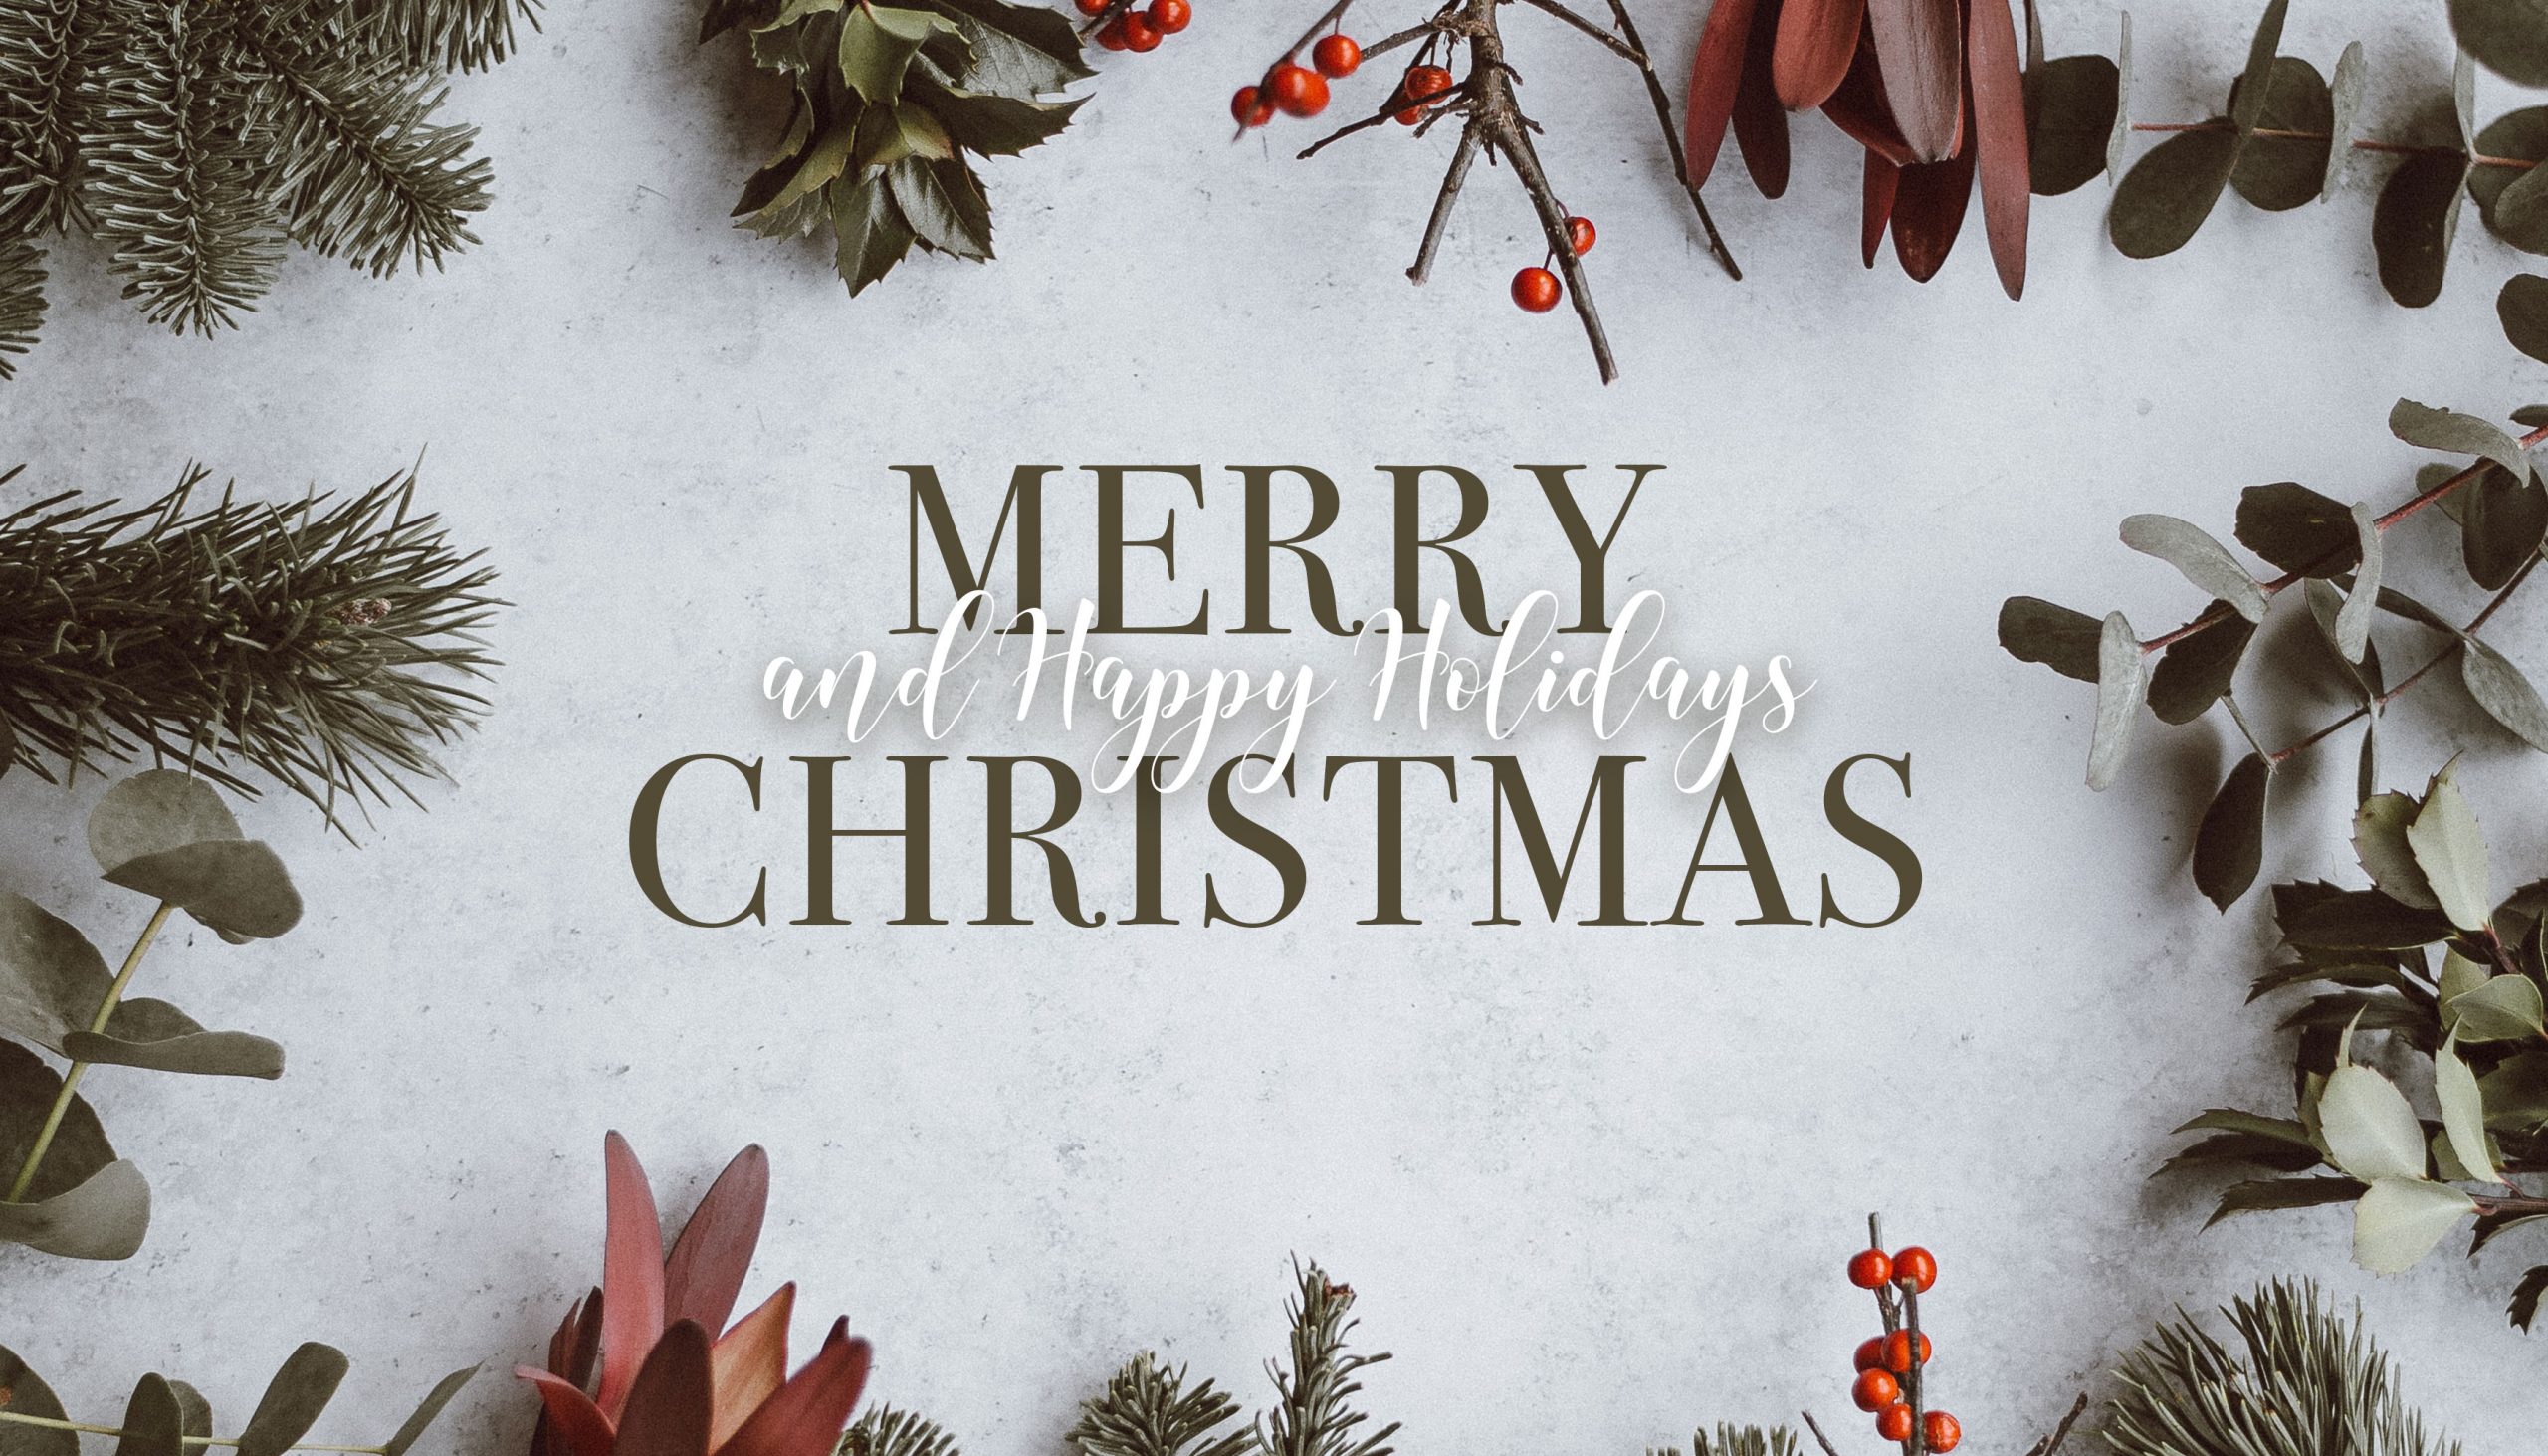 Merry Christmas From the COMPEL Team!